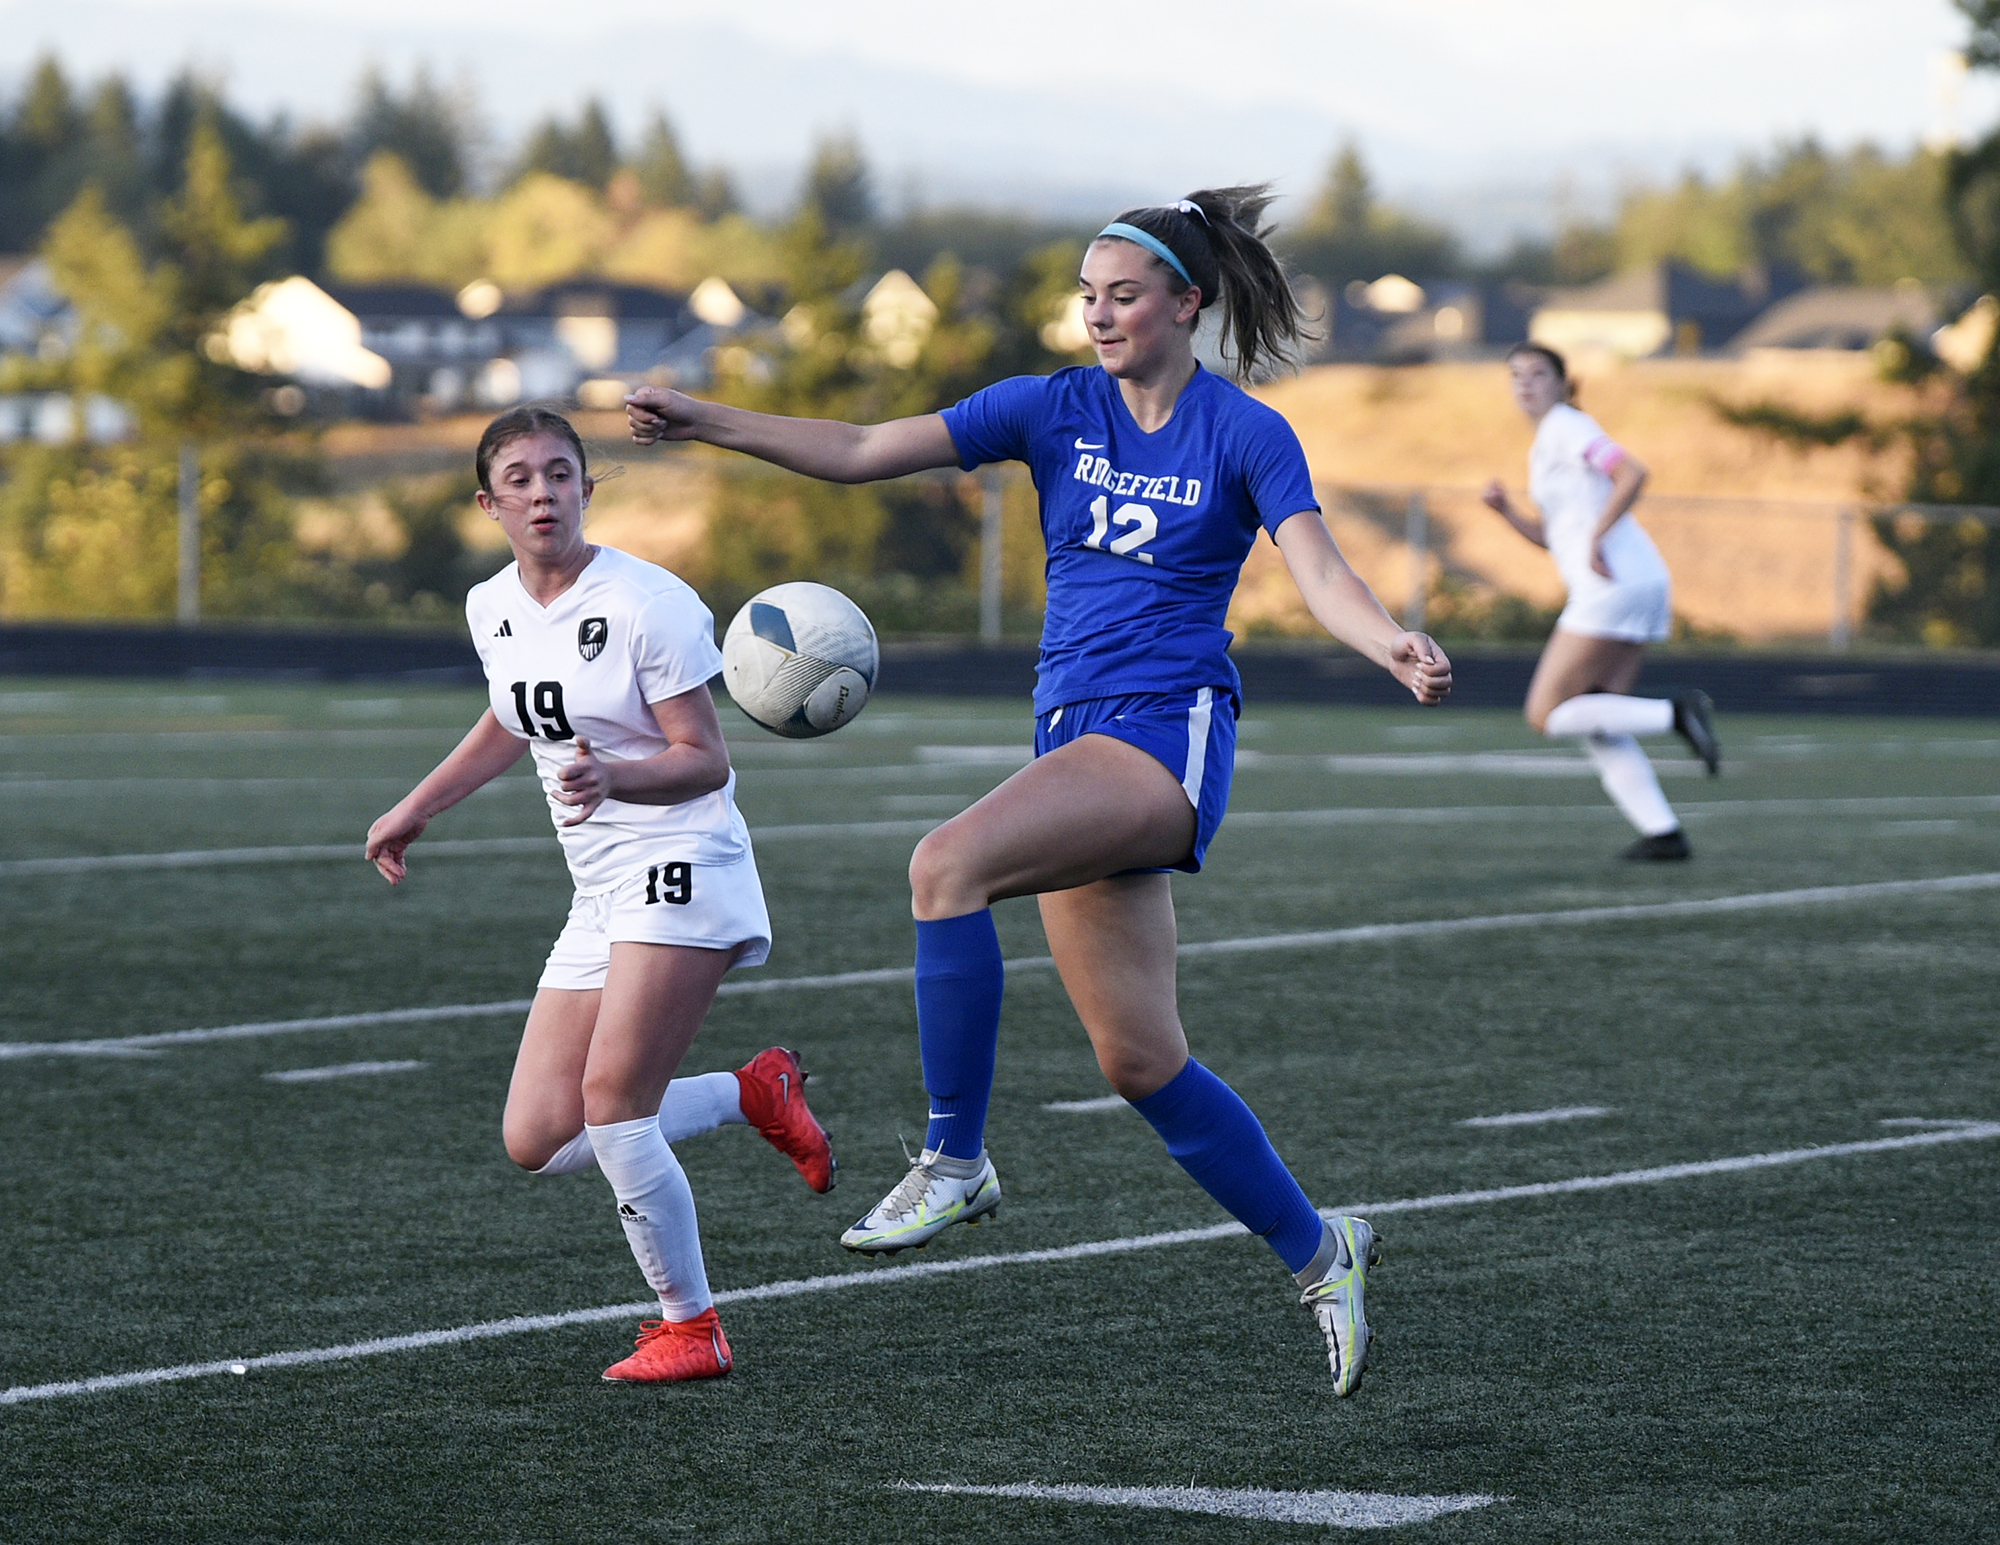 Ridgefield’s Marlee Buffham (12) controls the ball ahead of Union’s Sophia Euverman during a non-league girls soccer match at Ridgefield High School on Thursday, Sept. 7, 2023.